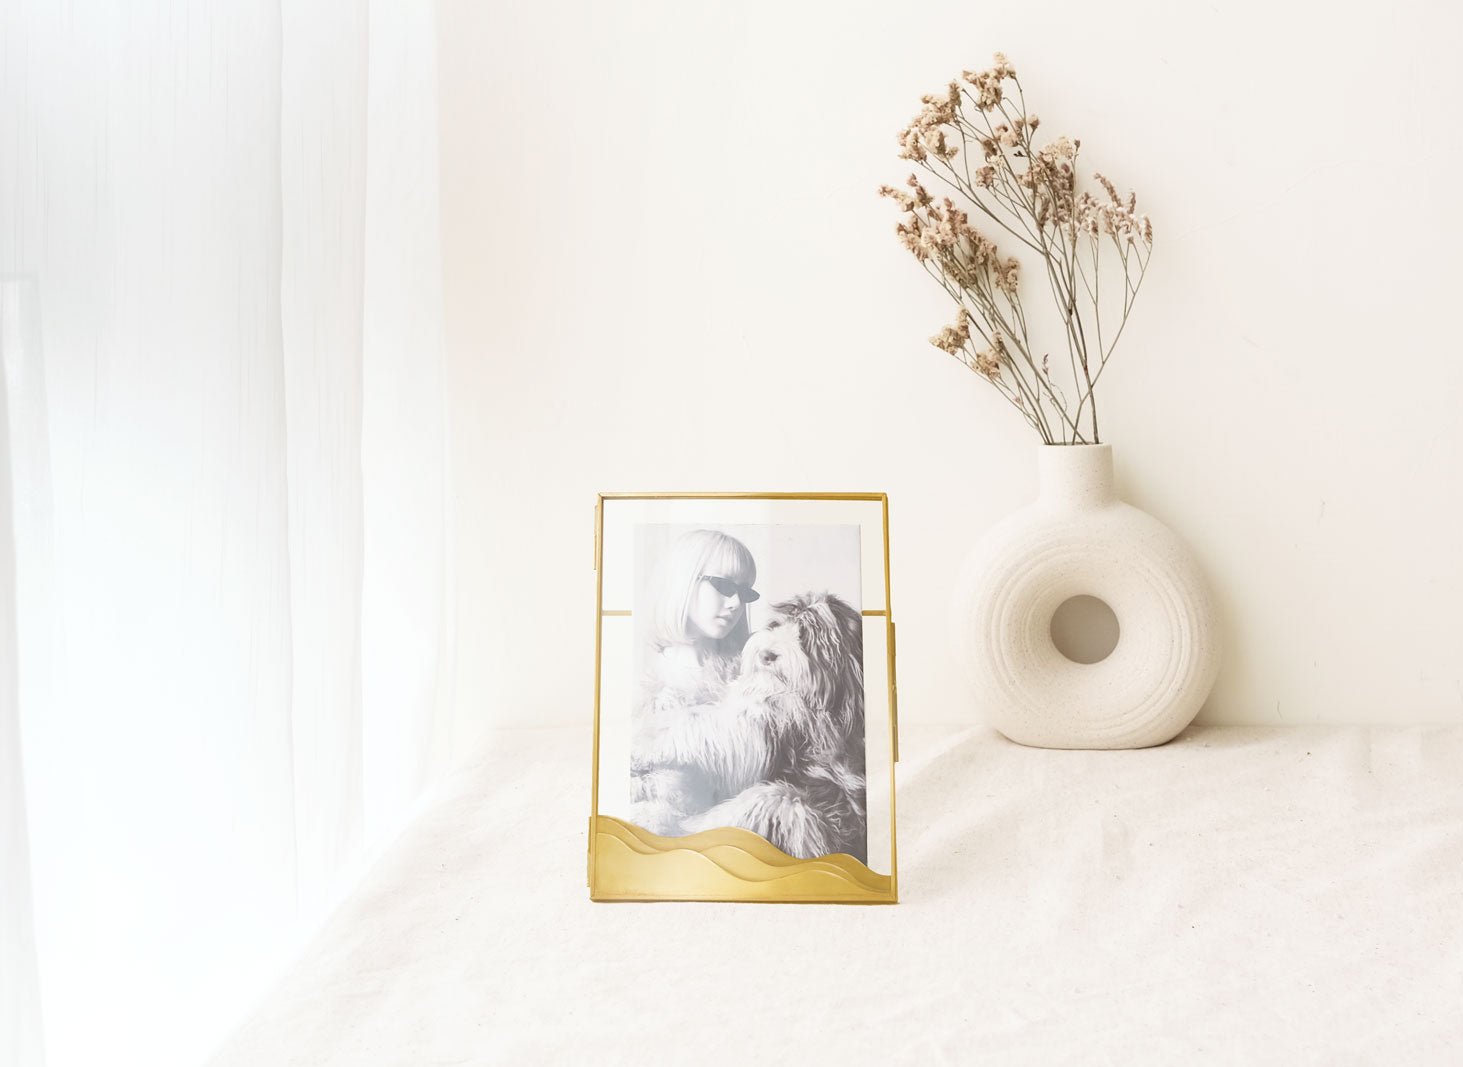 Decorative picture Frame for 5x7 photo - gold brass - Wave Design-The most beautiful house decor and the best home decorations collections at FONDAZZA.